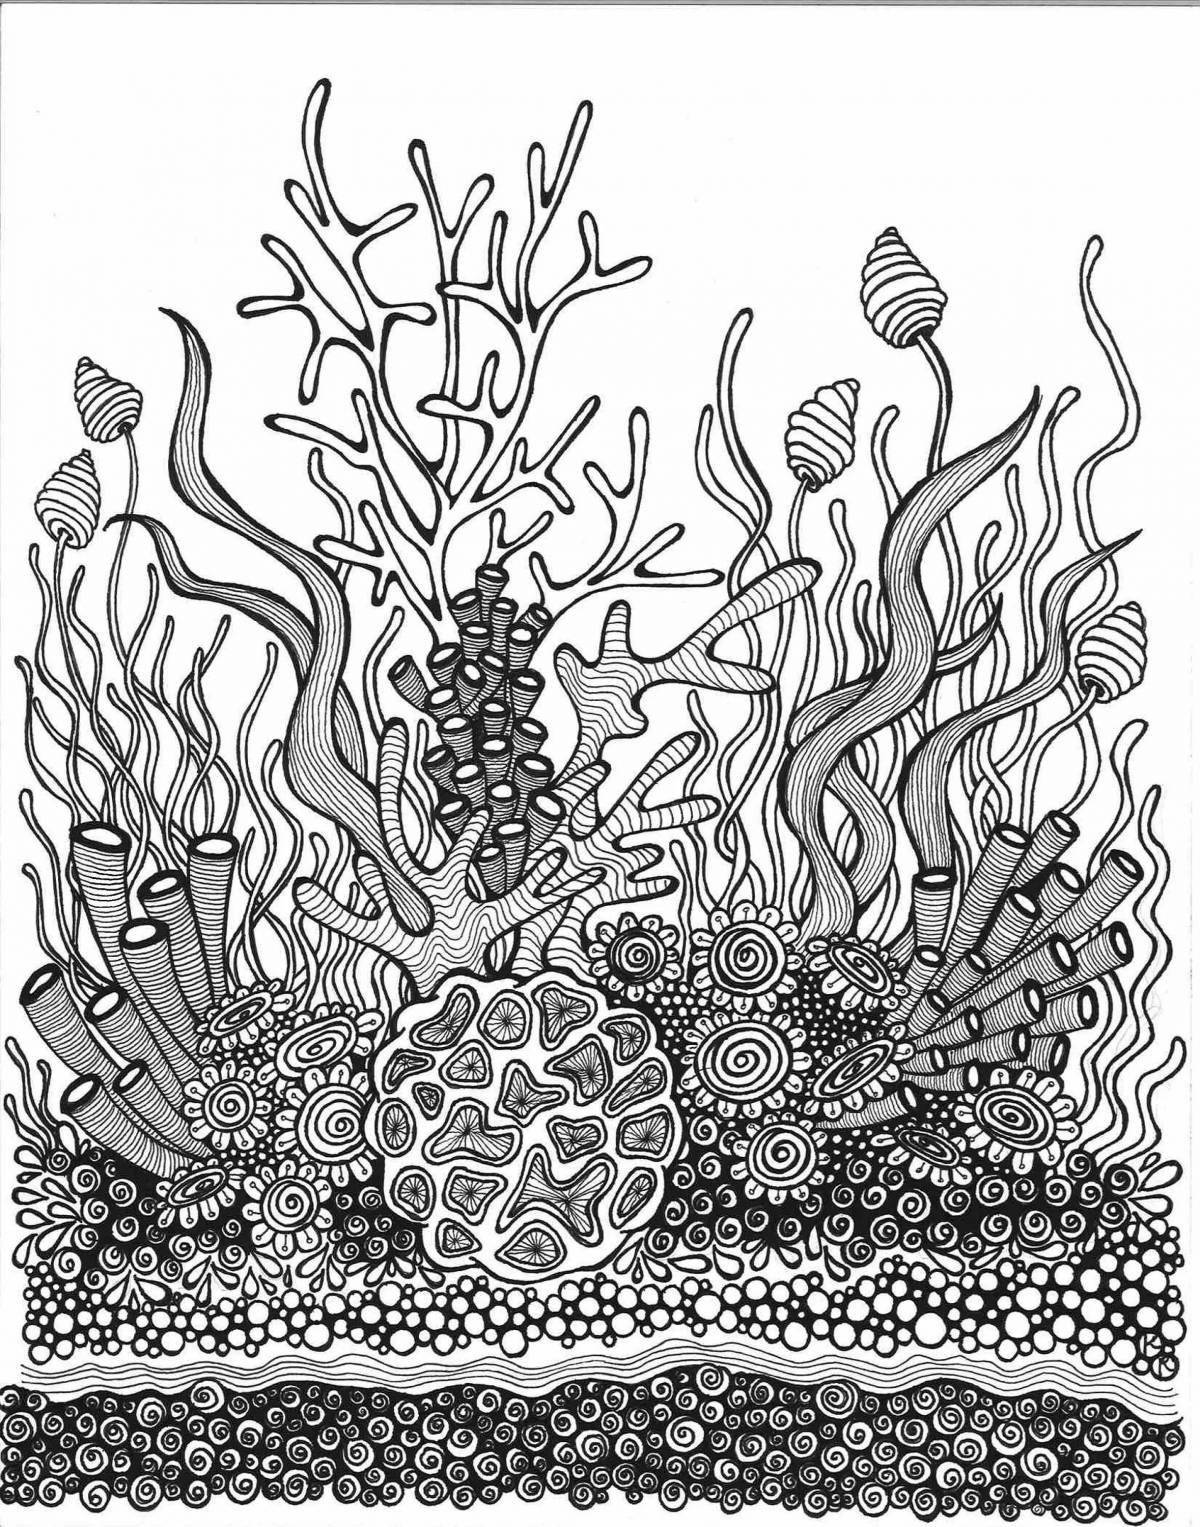 Coloring book shining coral reef